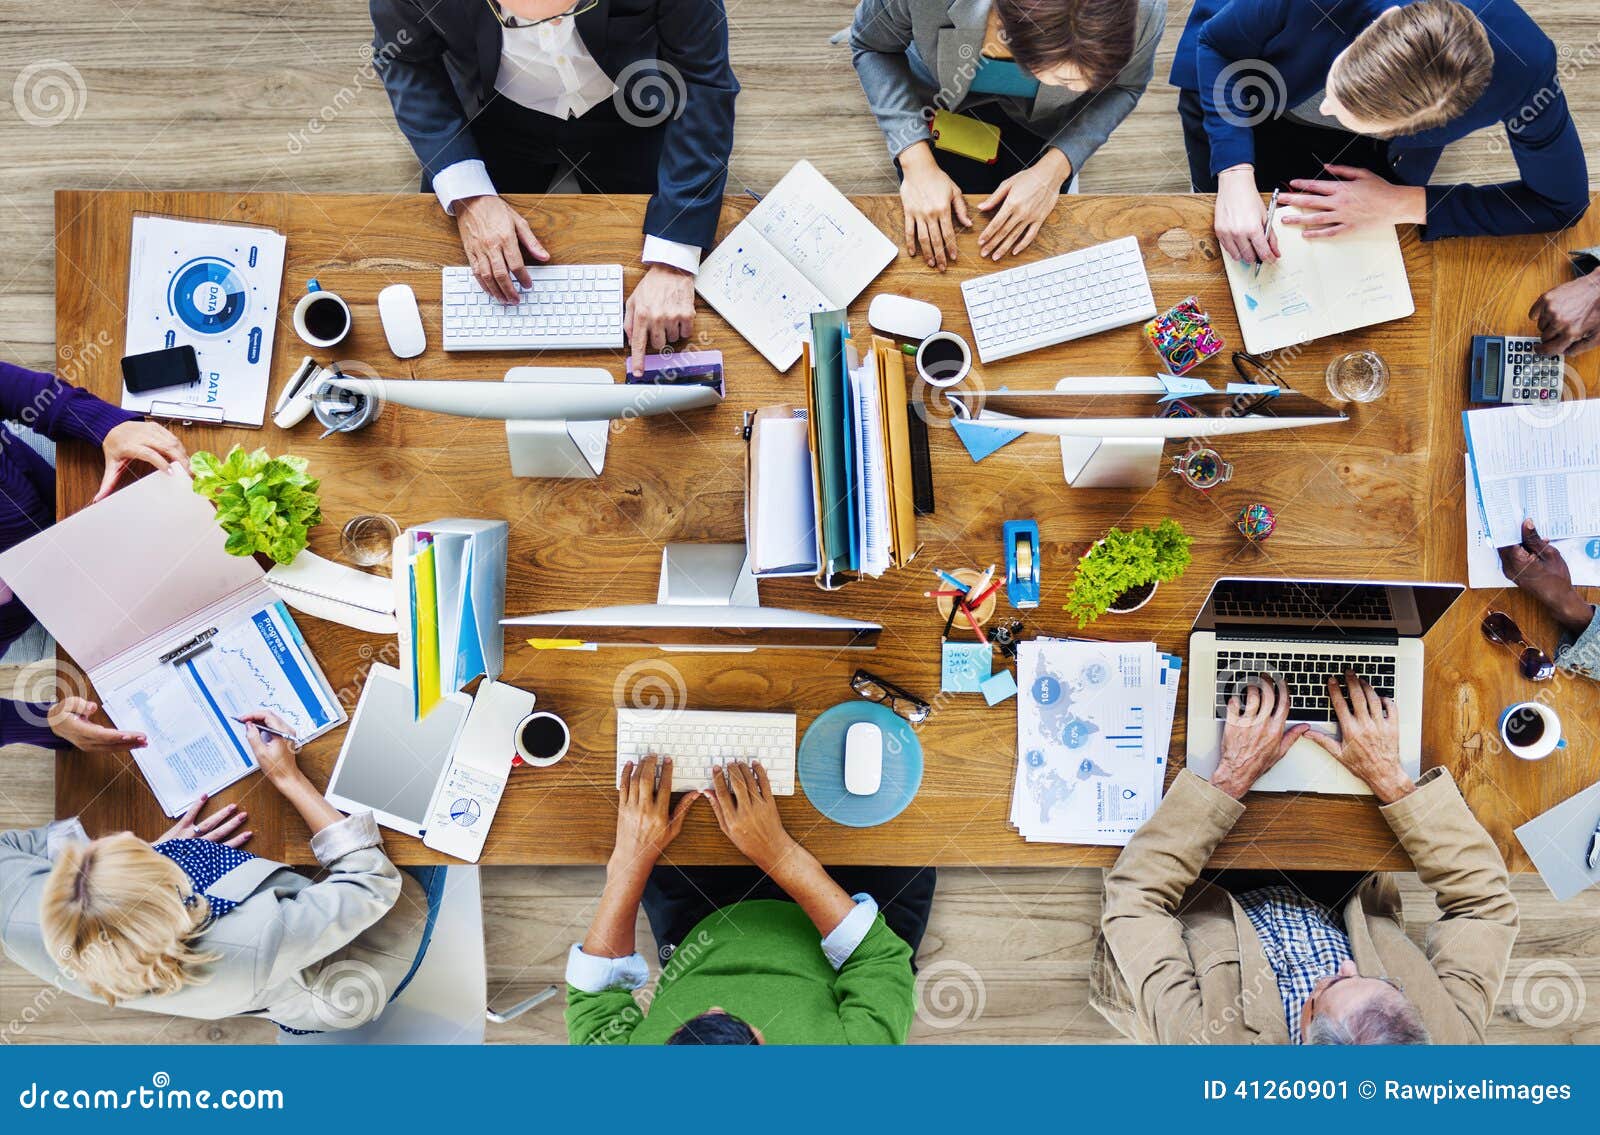 group of multiethnic busy people working in an office